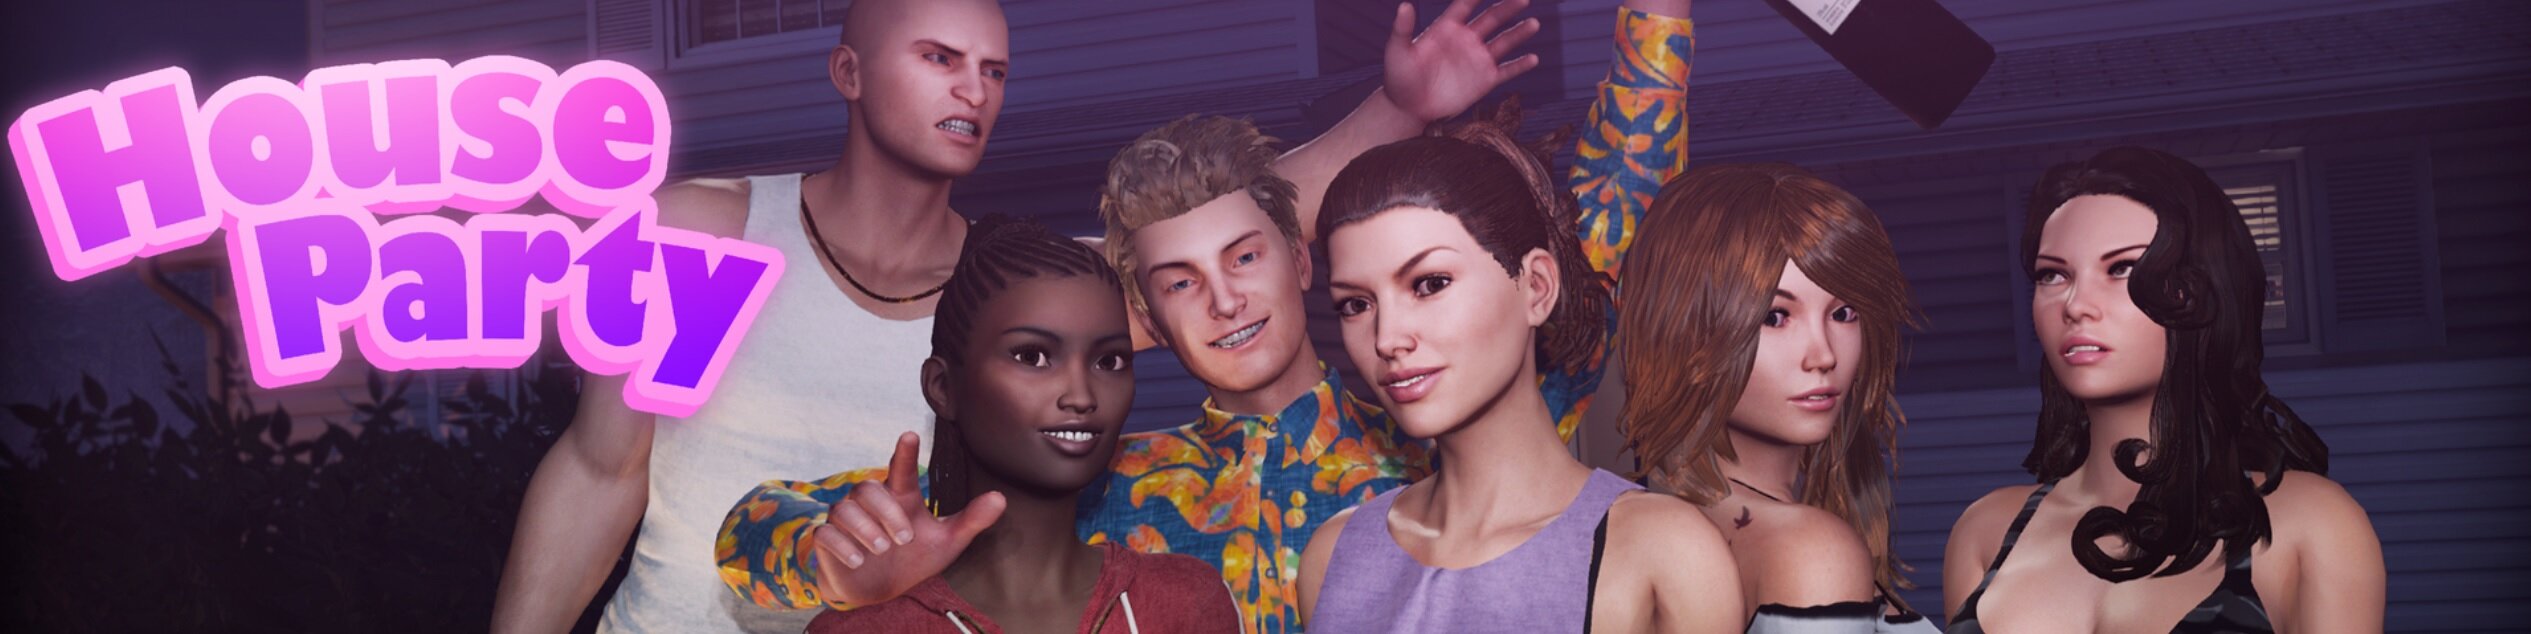 House Party v1.2.2.1Final Eek! Games